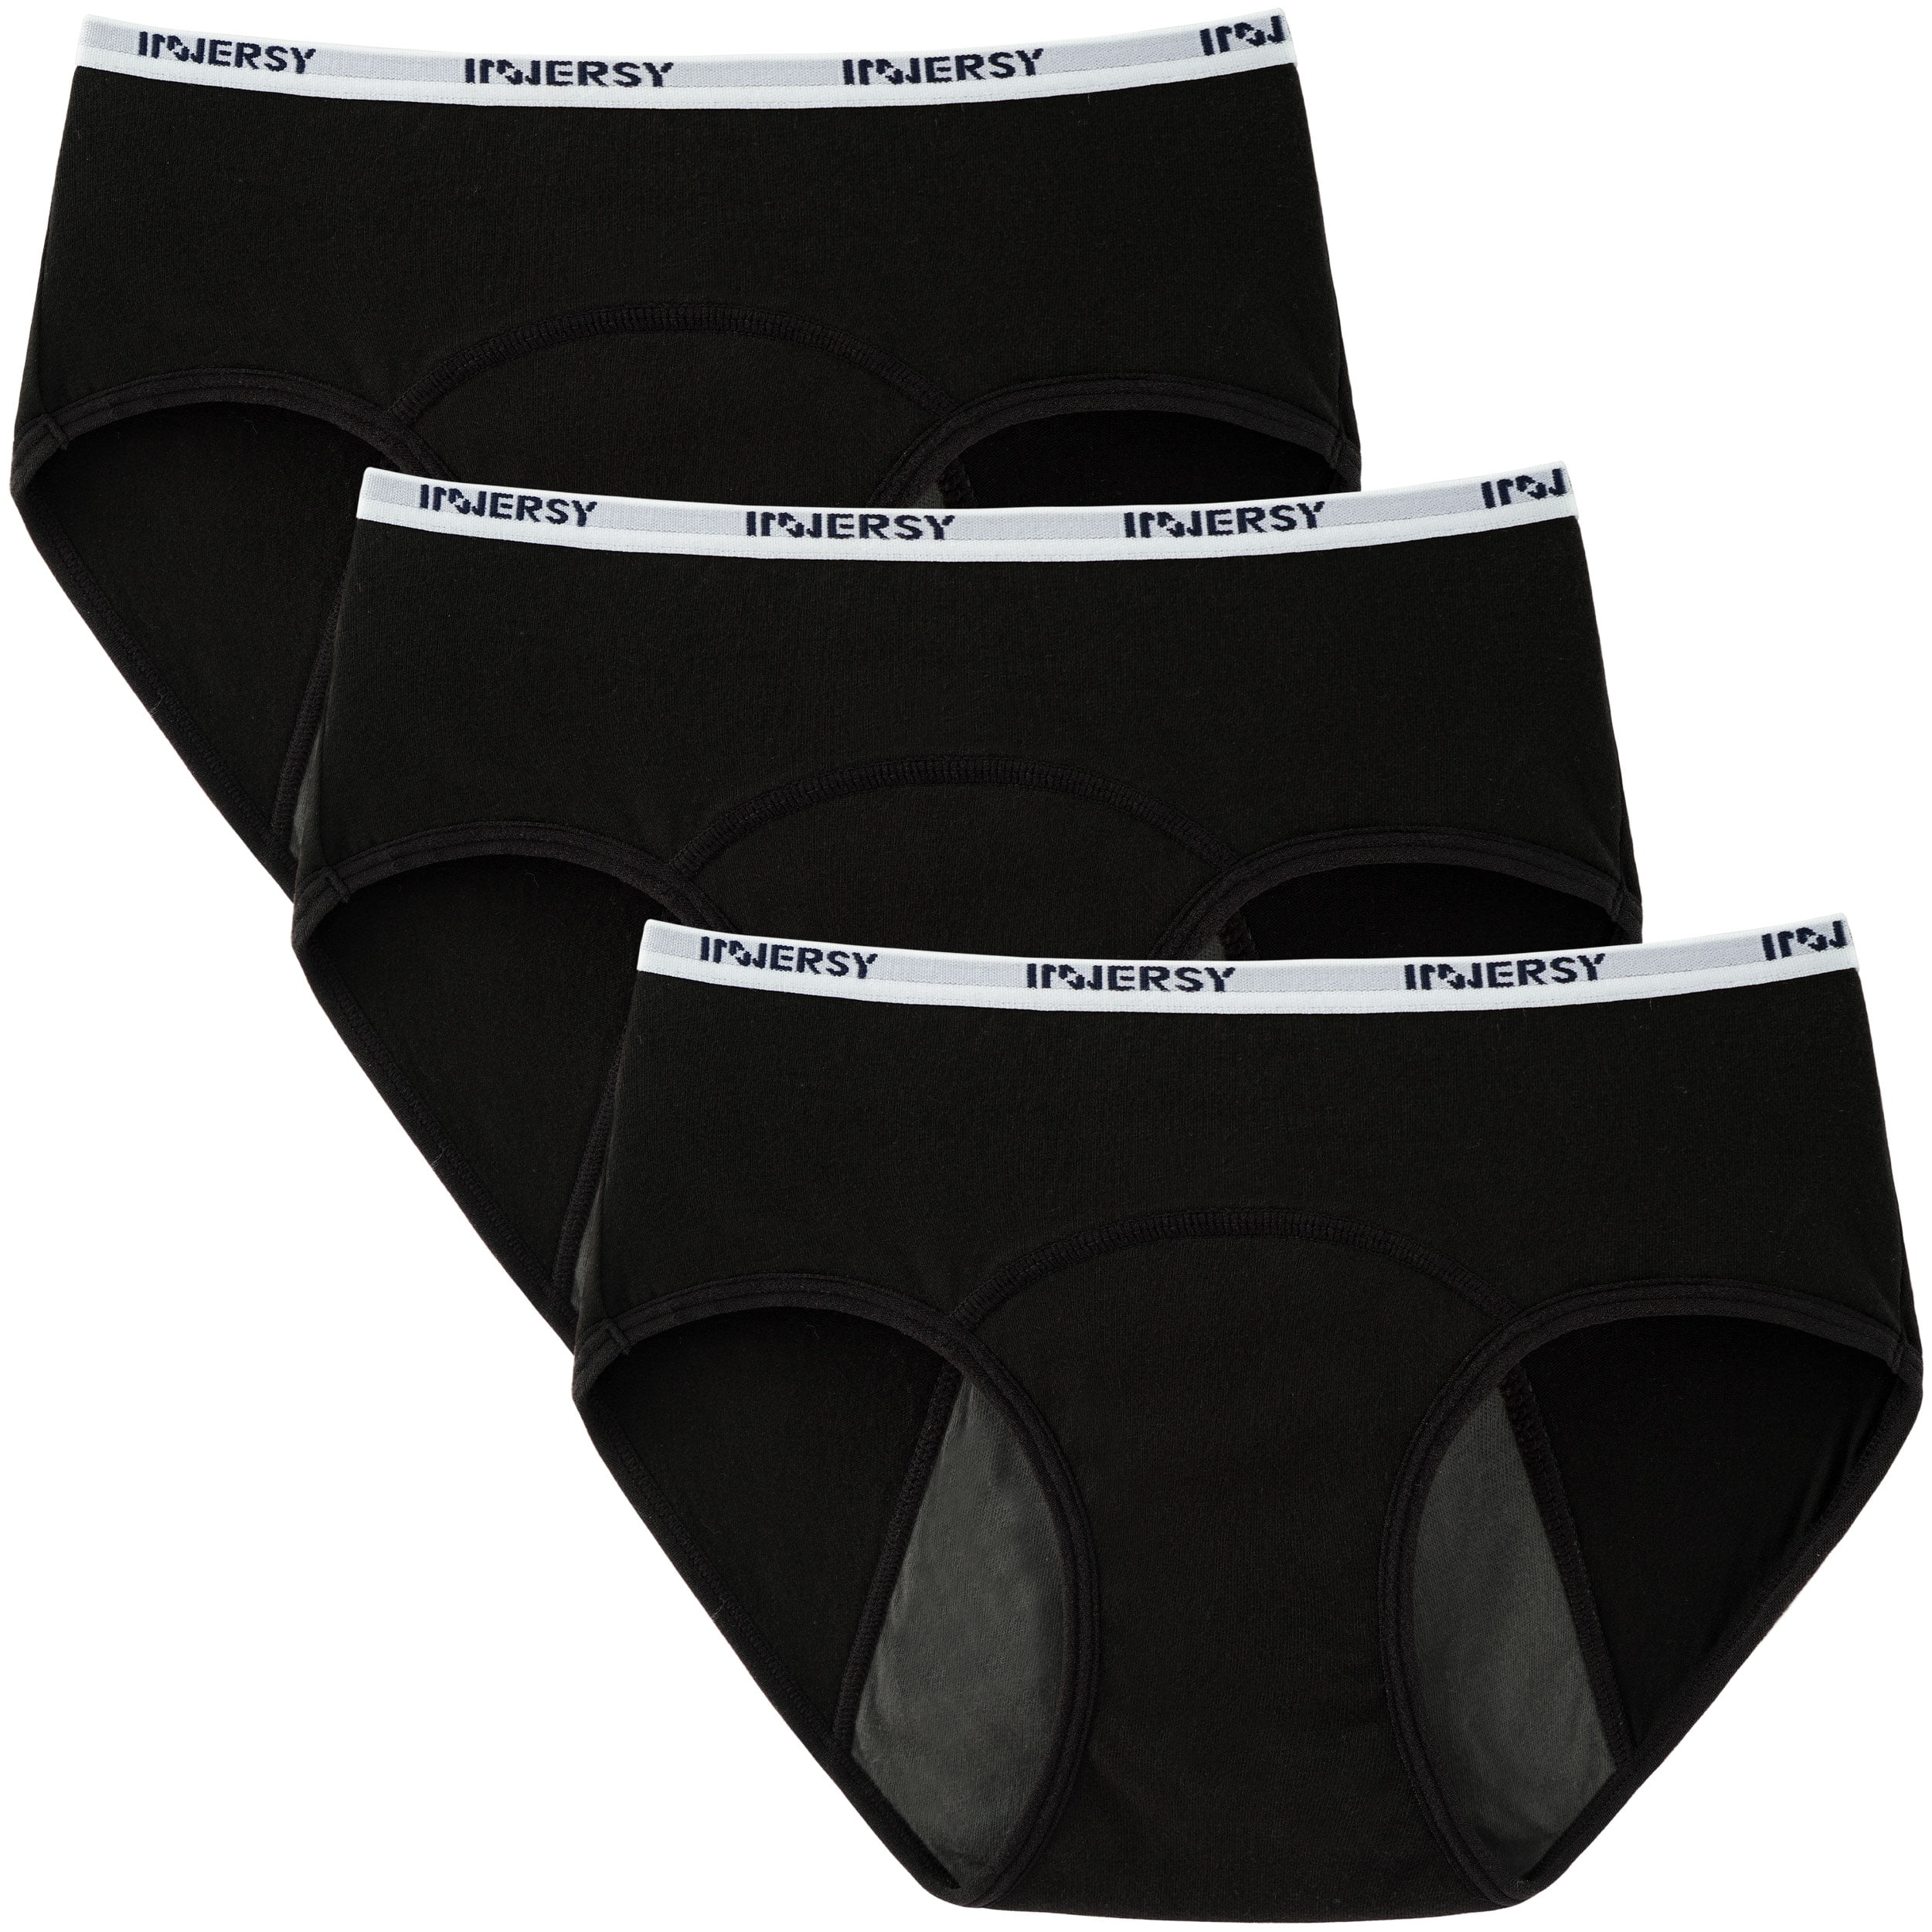 INNERSY Big Girls' Period Panties Cotton Menstrual Underwear For Teens 3- Pack（S(8-10 yrs), Black/Green Band) 